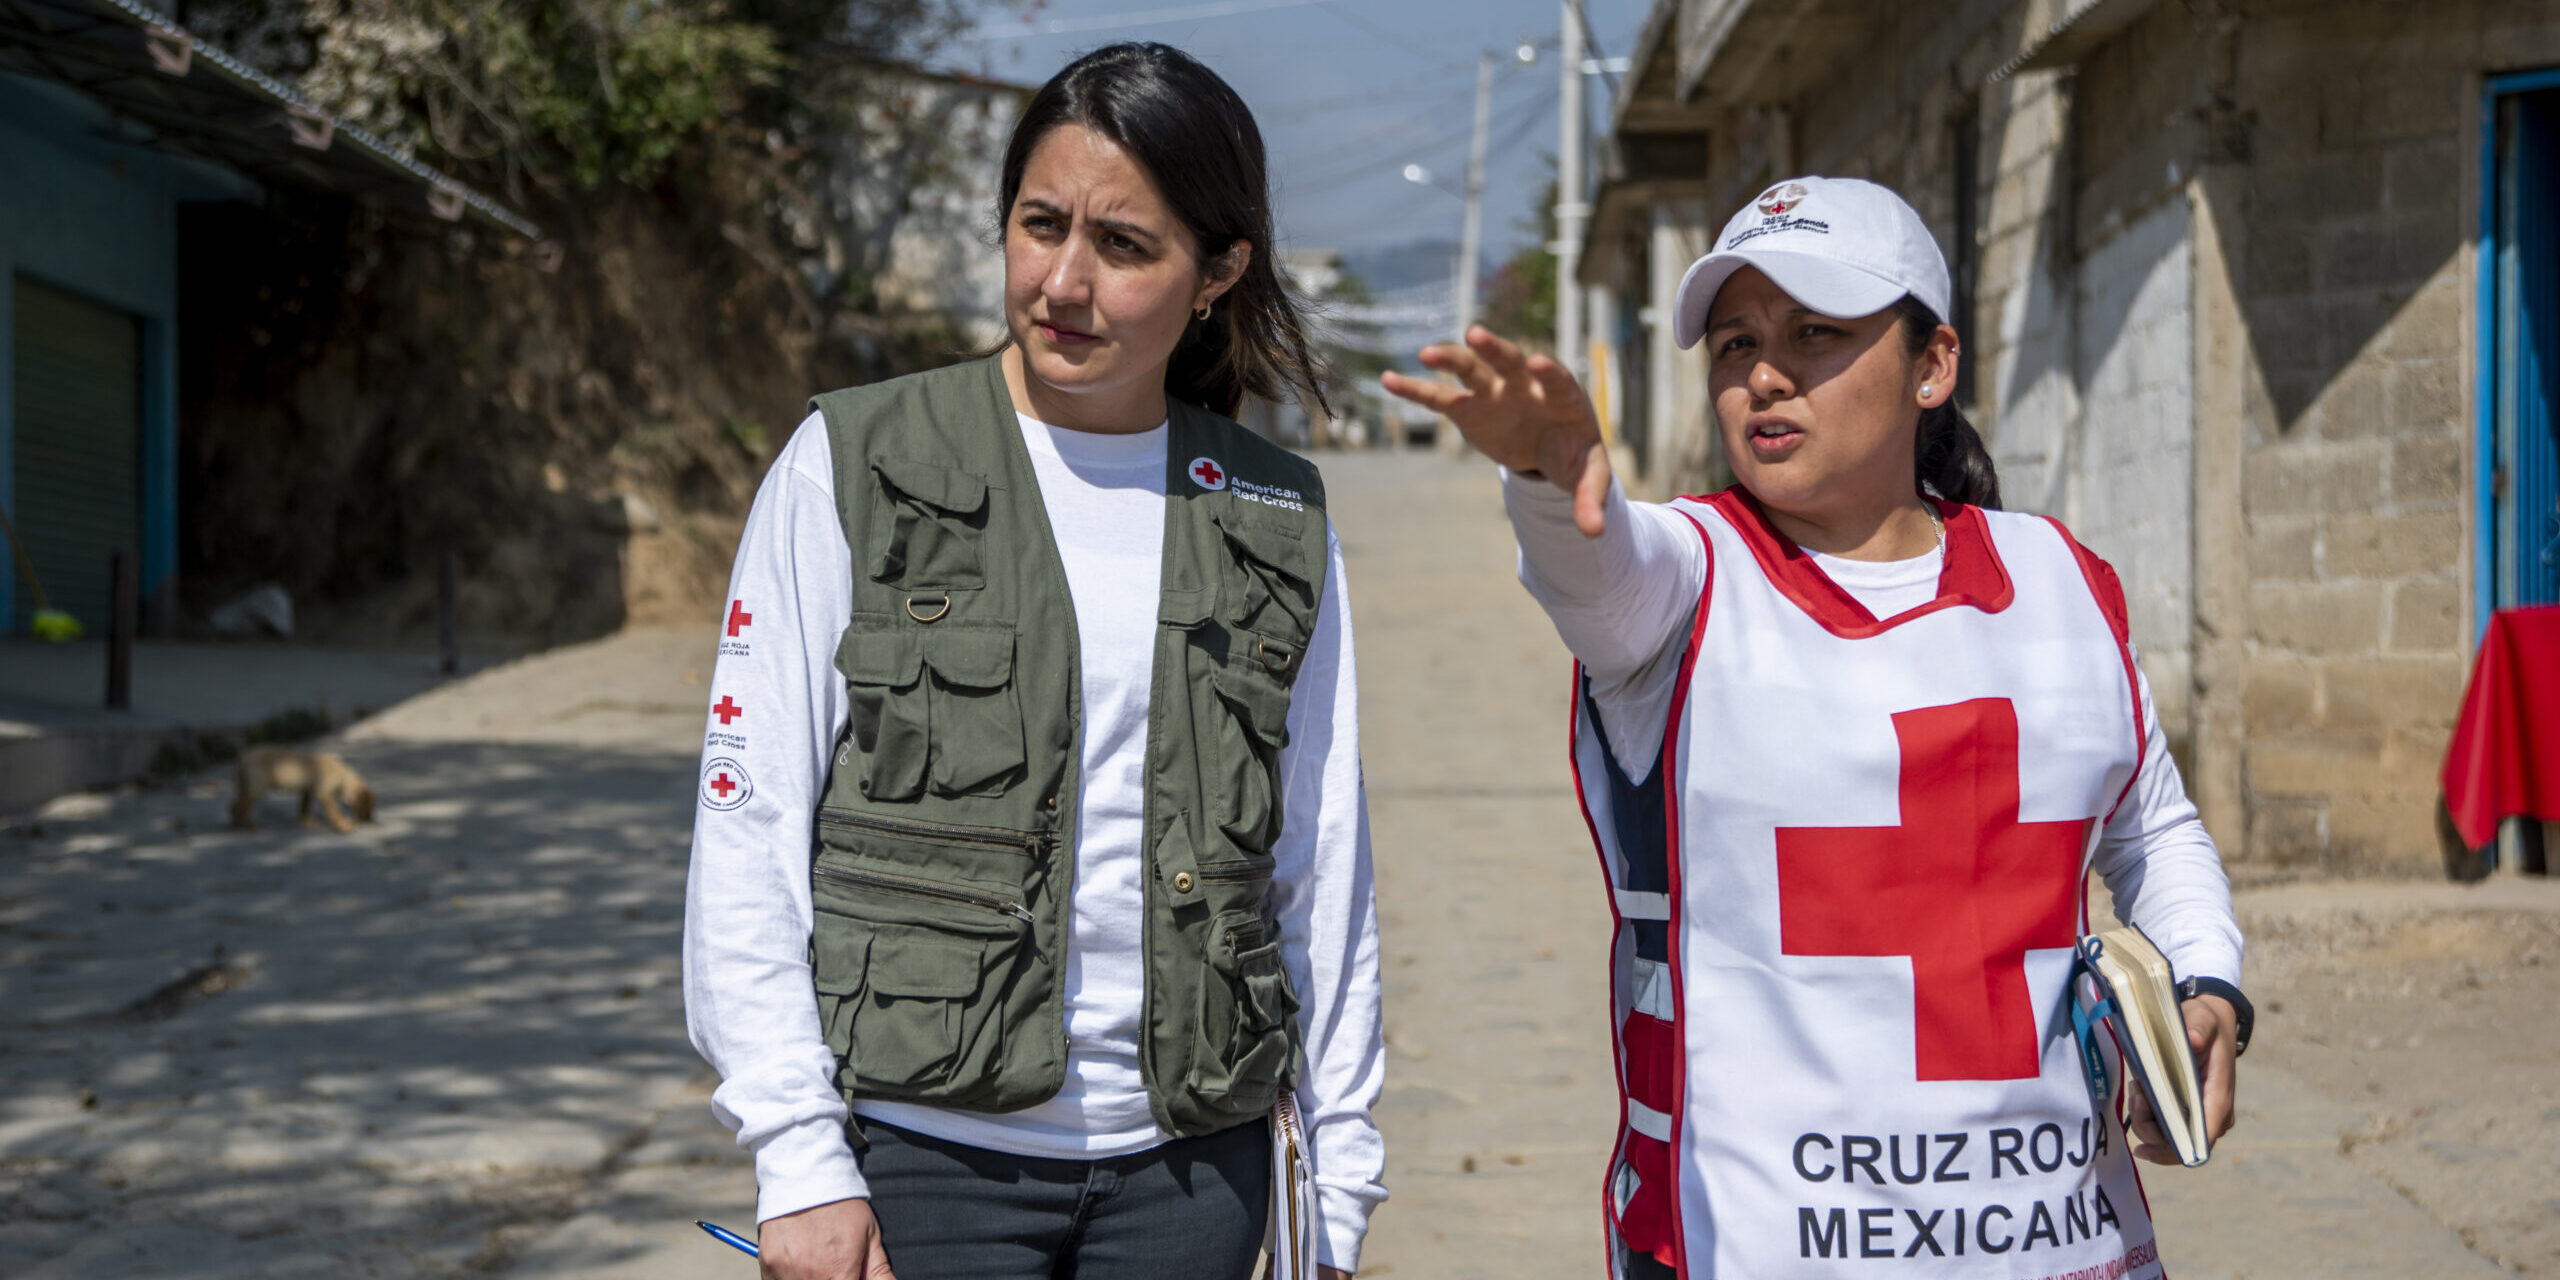 February 20, 2020. Metepec, Morelos, Mexico. Two years after a powerful earthquake struck Mexico, the American Red Cross, in partnership with the Mexican Red Cross and the Canadian Red Cross, continues to support communities affected by the disaster. Through a series of resiliency activities made possible through financial support from the American Red Cross, people living in disaster-prone communities in Mexico are empowered to learn skills that prepare them for future disasters. From providing hygiene and sanitation education to offering trainings on how to administer first aid, the Red Cross is actively involved in helping to build stronger, more resilient communities across the country.
Mexican Red Cross and American Red Cross workers conduct a walkthrough for the first disaster simulation set to take place on February 20, 2020 in Metepec, a city in Morelos, Mexico. 

Metepec residents are at risk of several potential disasters like volcano eruptions, earthquakes and forest fires. Through support from the Red Cross, disaster response volunteers are equipped with training and skills that allow them to conduct disaster simulations to help prepare their communities for potential disasters. On February 20, 2020, disaster response volunteers hosted their first simulation, which entailed alerting the community about a disaster and the need to evacuate. Disaster response volunteers practiced guiding community members to an evacuation meeting zone, administering first aid, and locating and evacuating the most vulnerable. Photo by Brad Zerivitz/American Red Cross